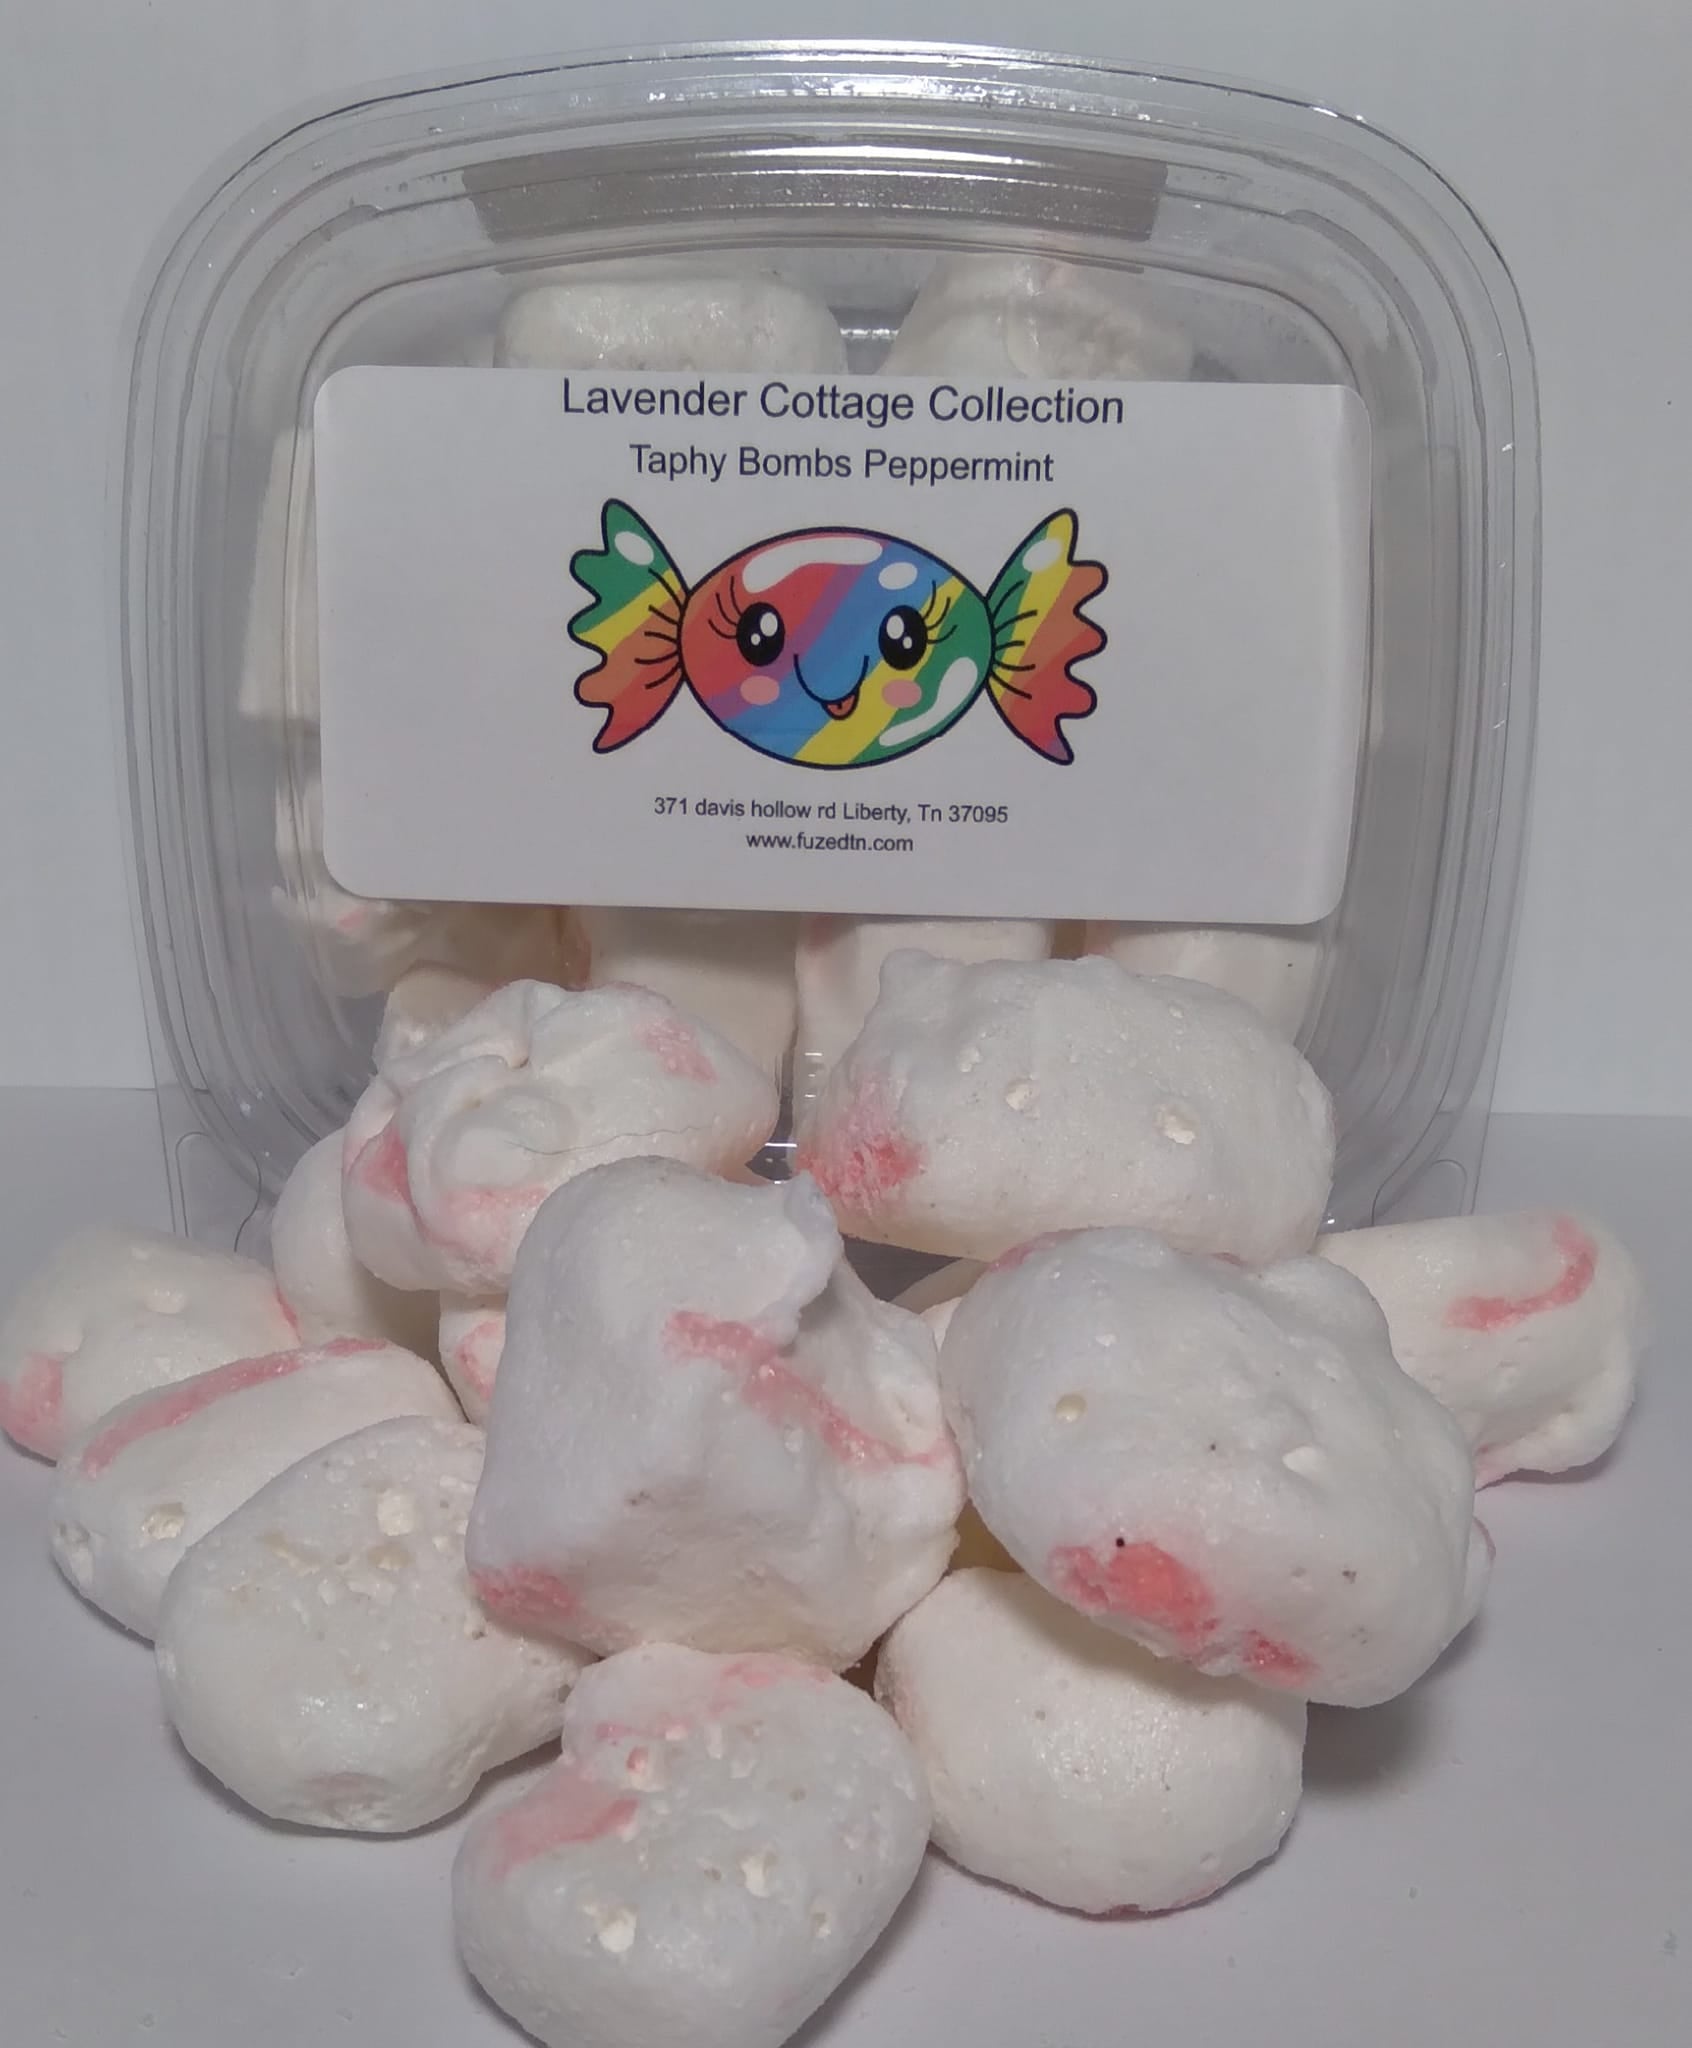 Freeze Dried Taphy Bombs Peppermint small